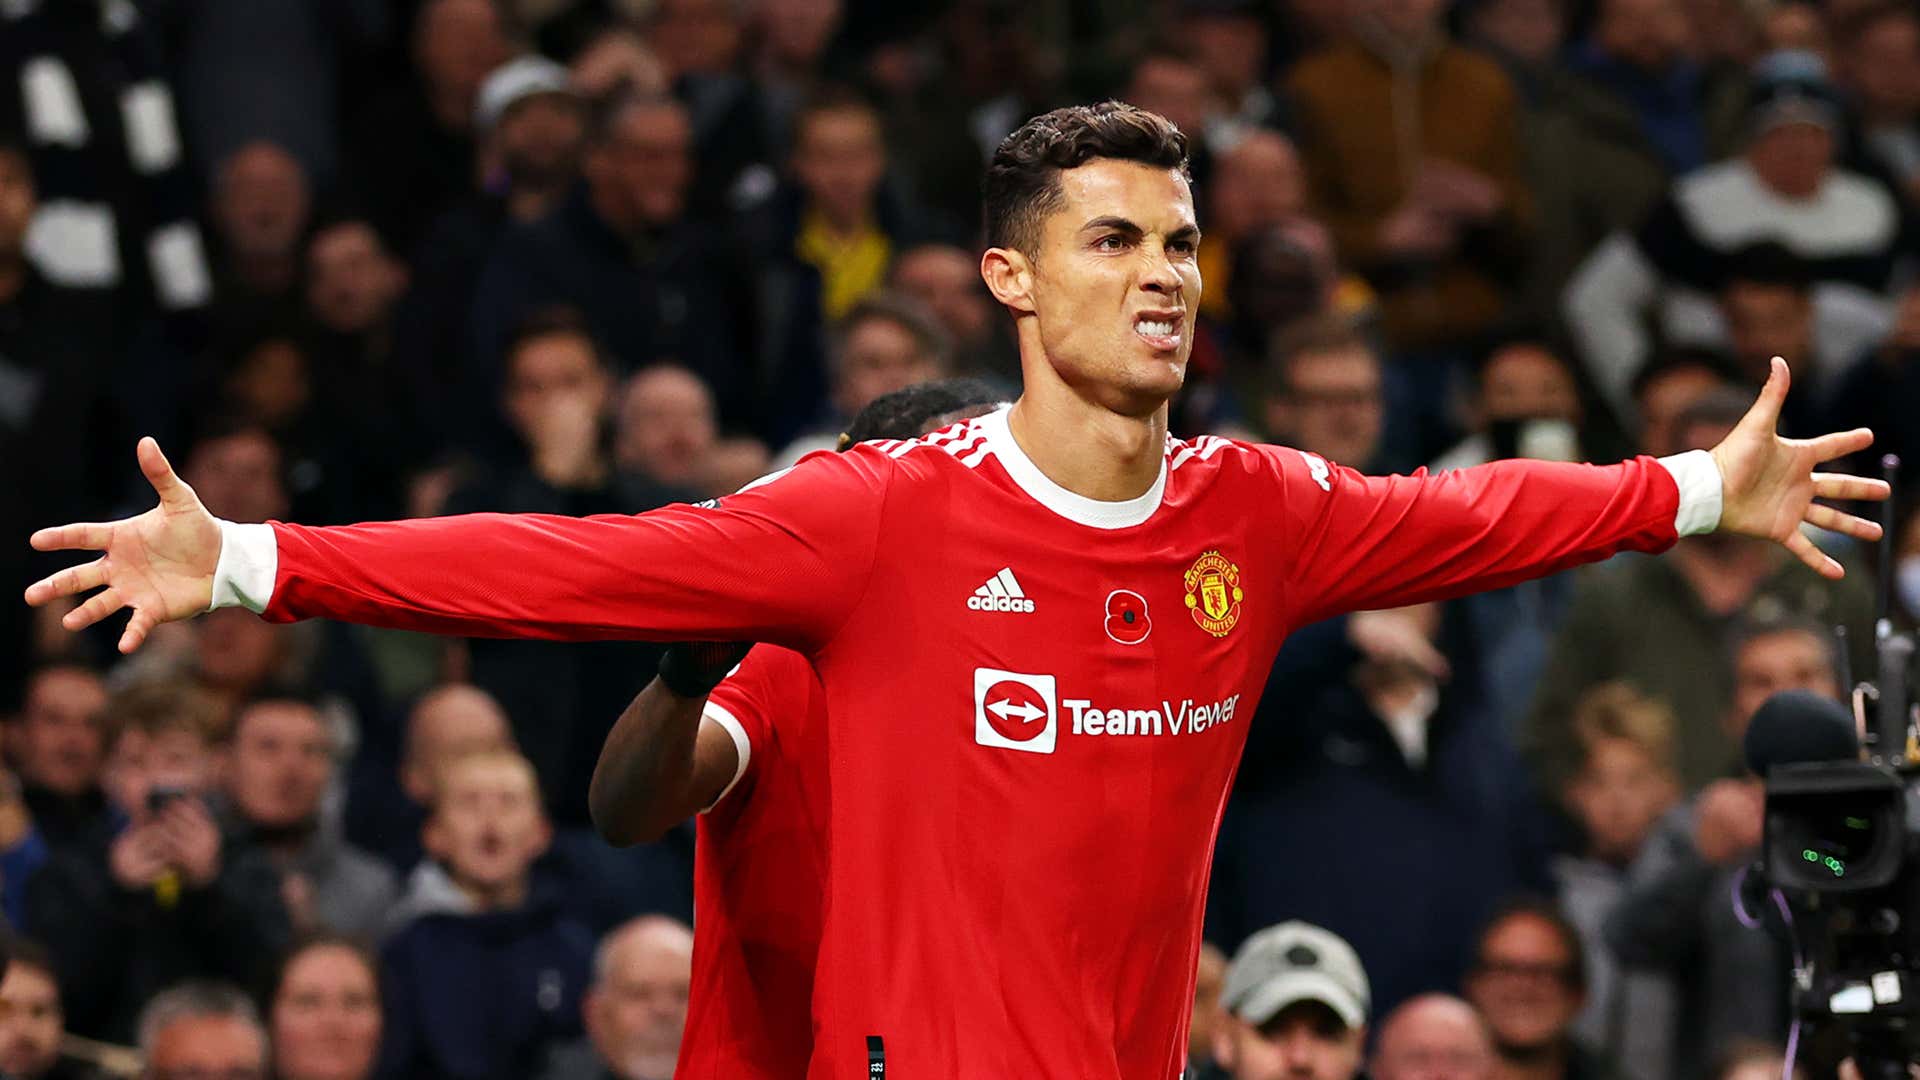 Ronaldo leads Manchester United from the front in win over Tottenham